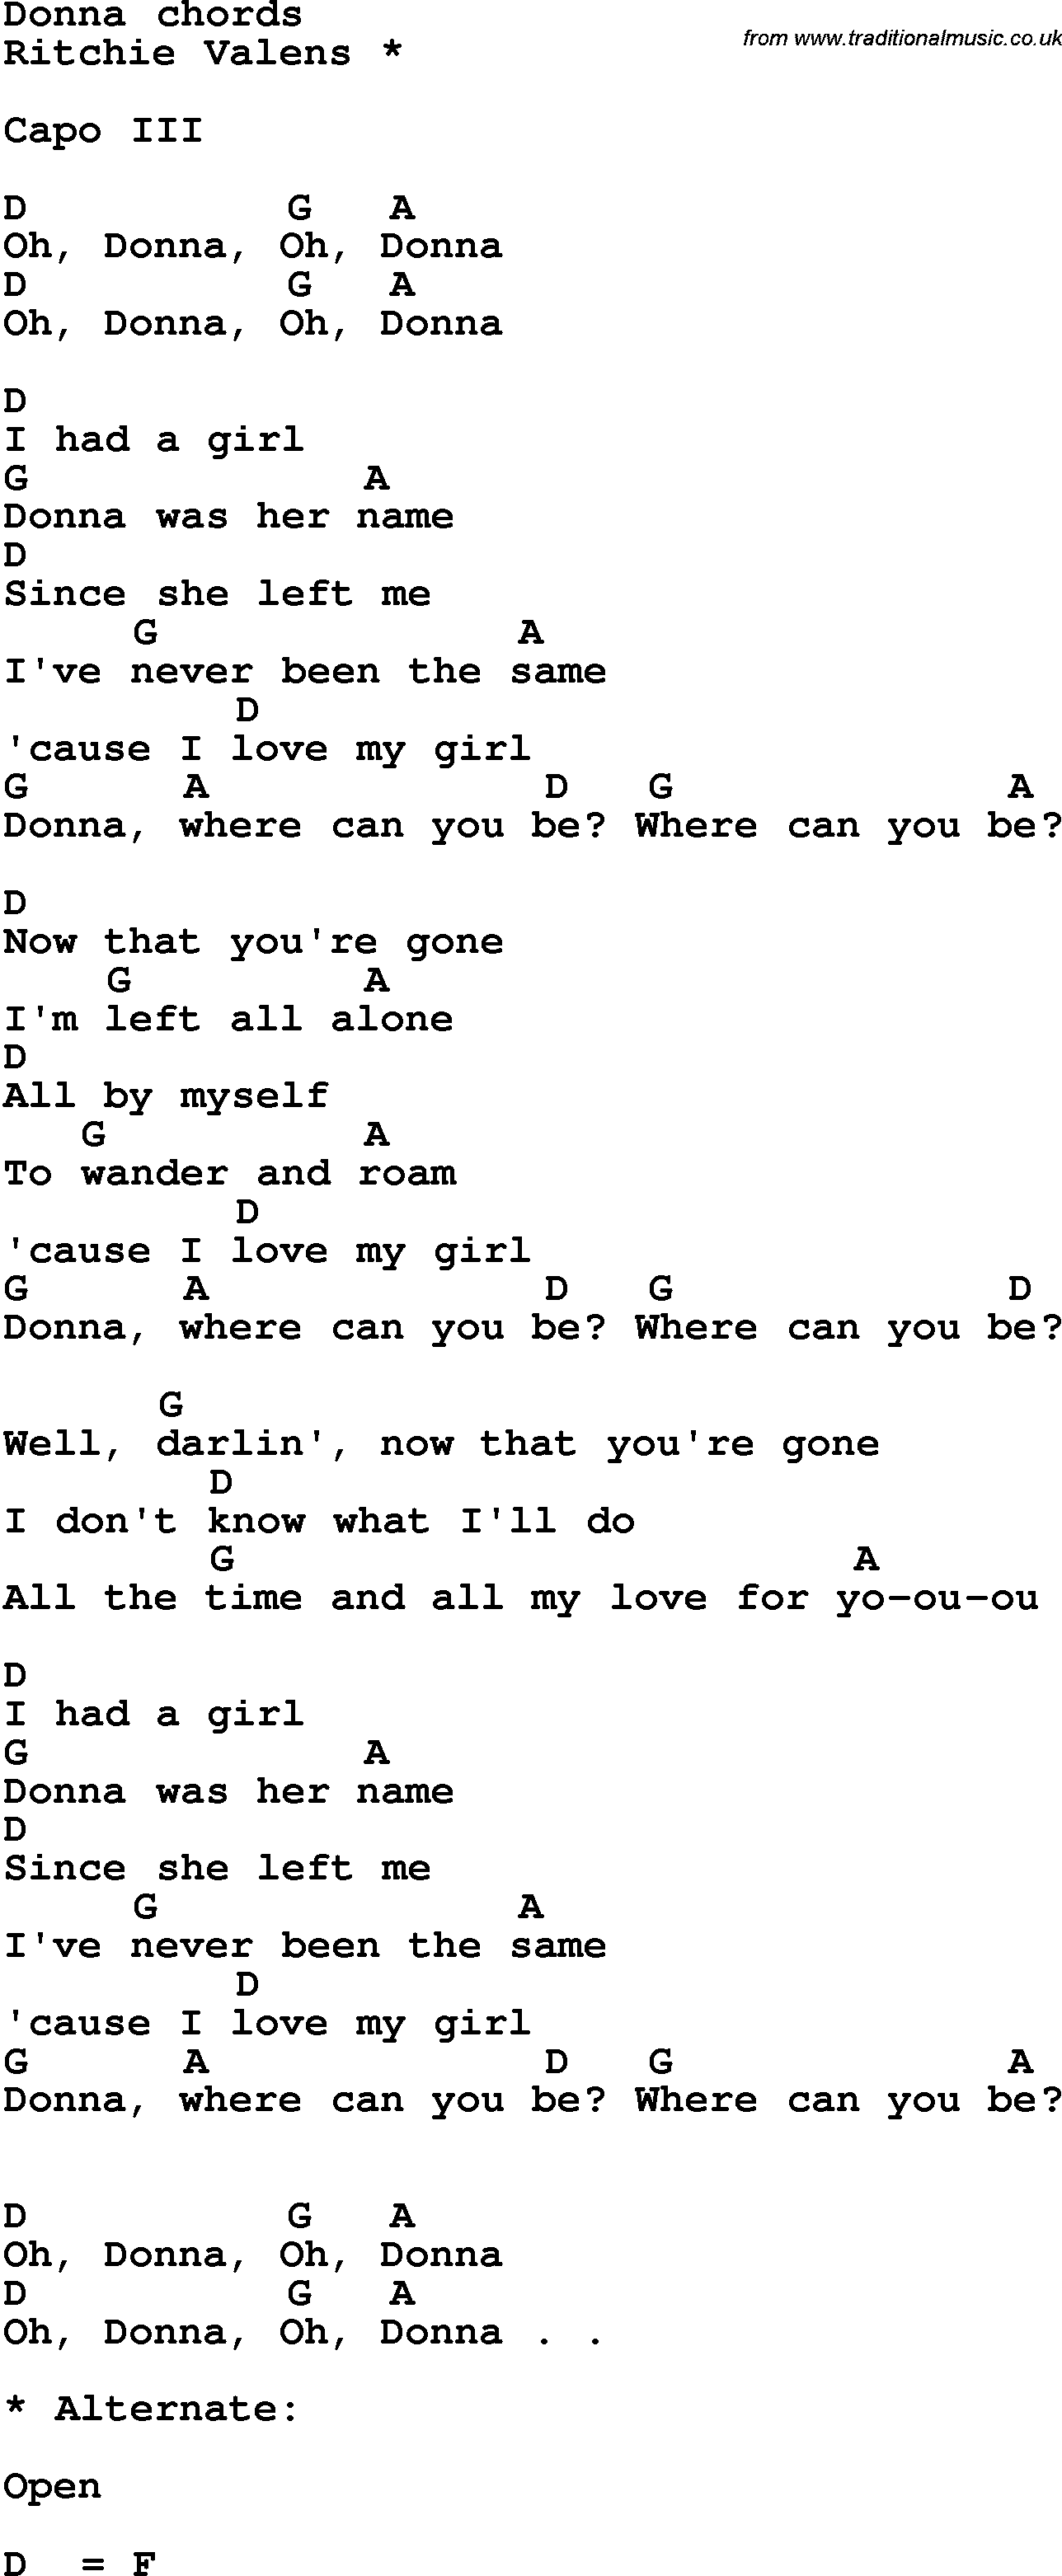 Song Lyrics with guitar chords for Donna